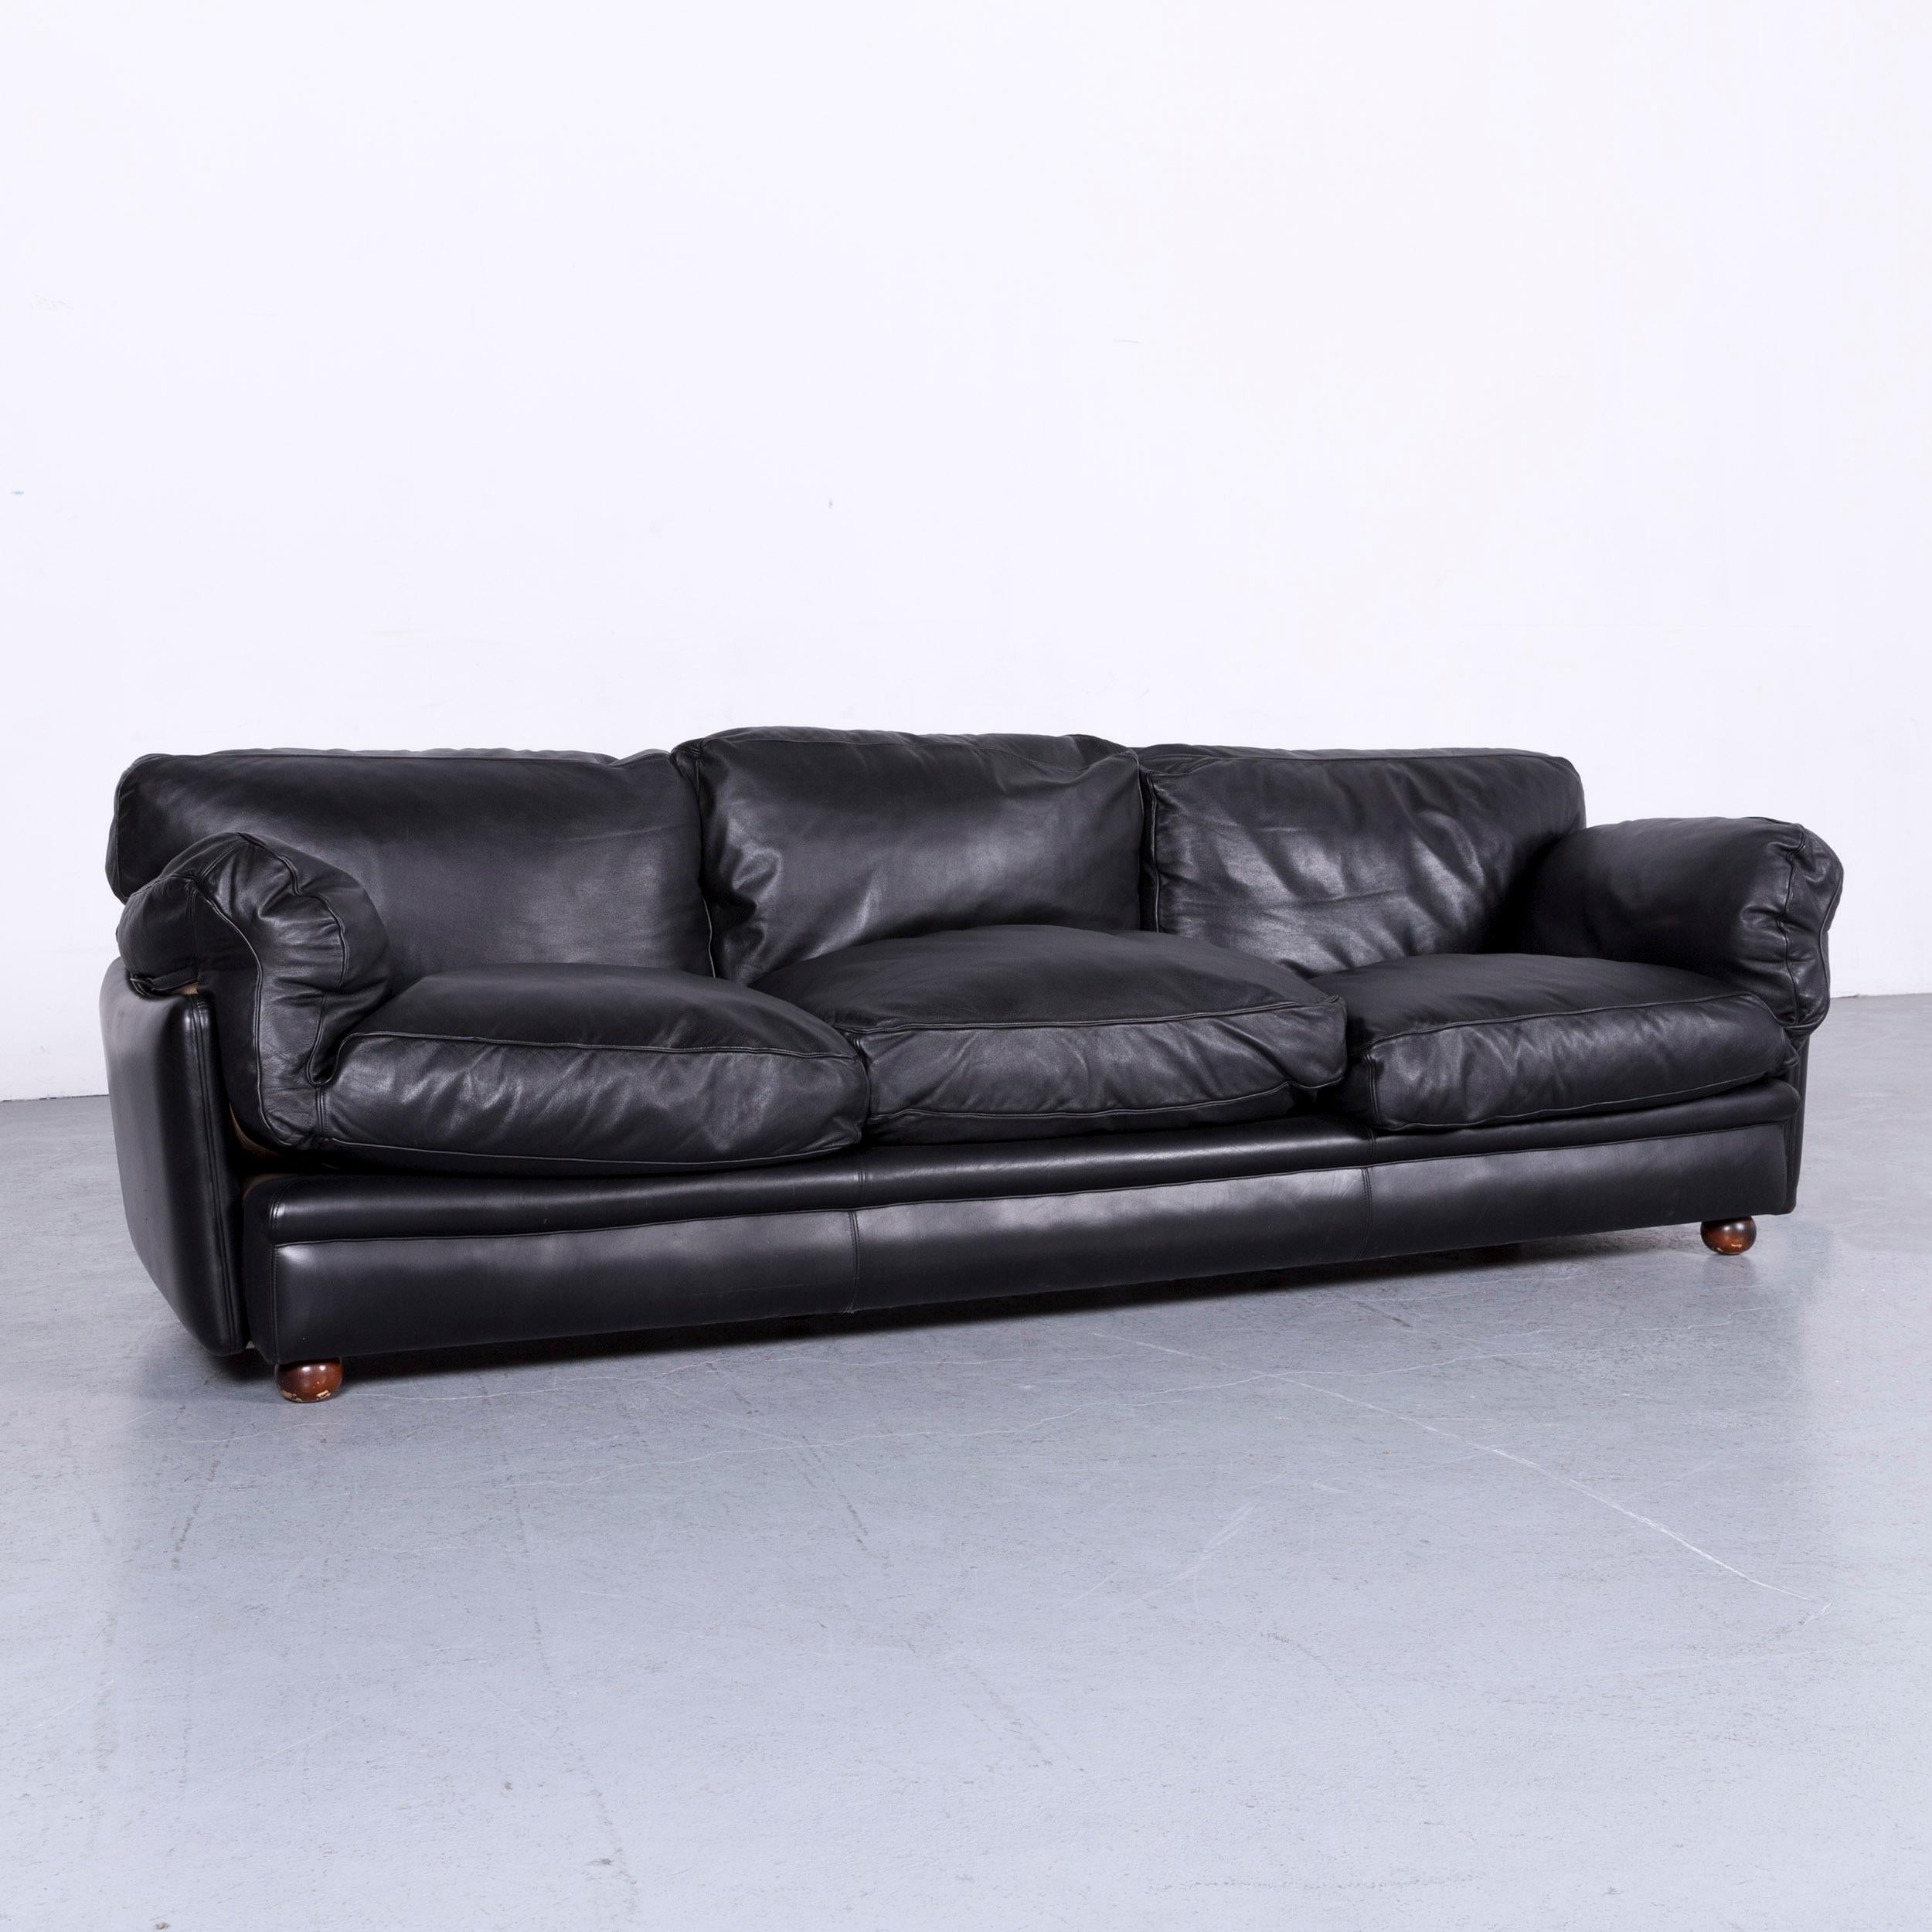 We bring to you a Poltrona Frau designer leather sofa in black three-seat couch.